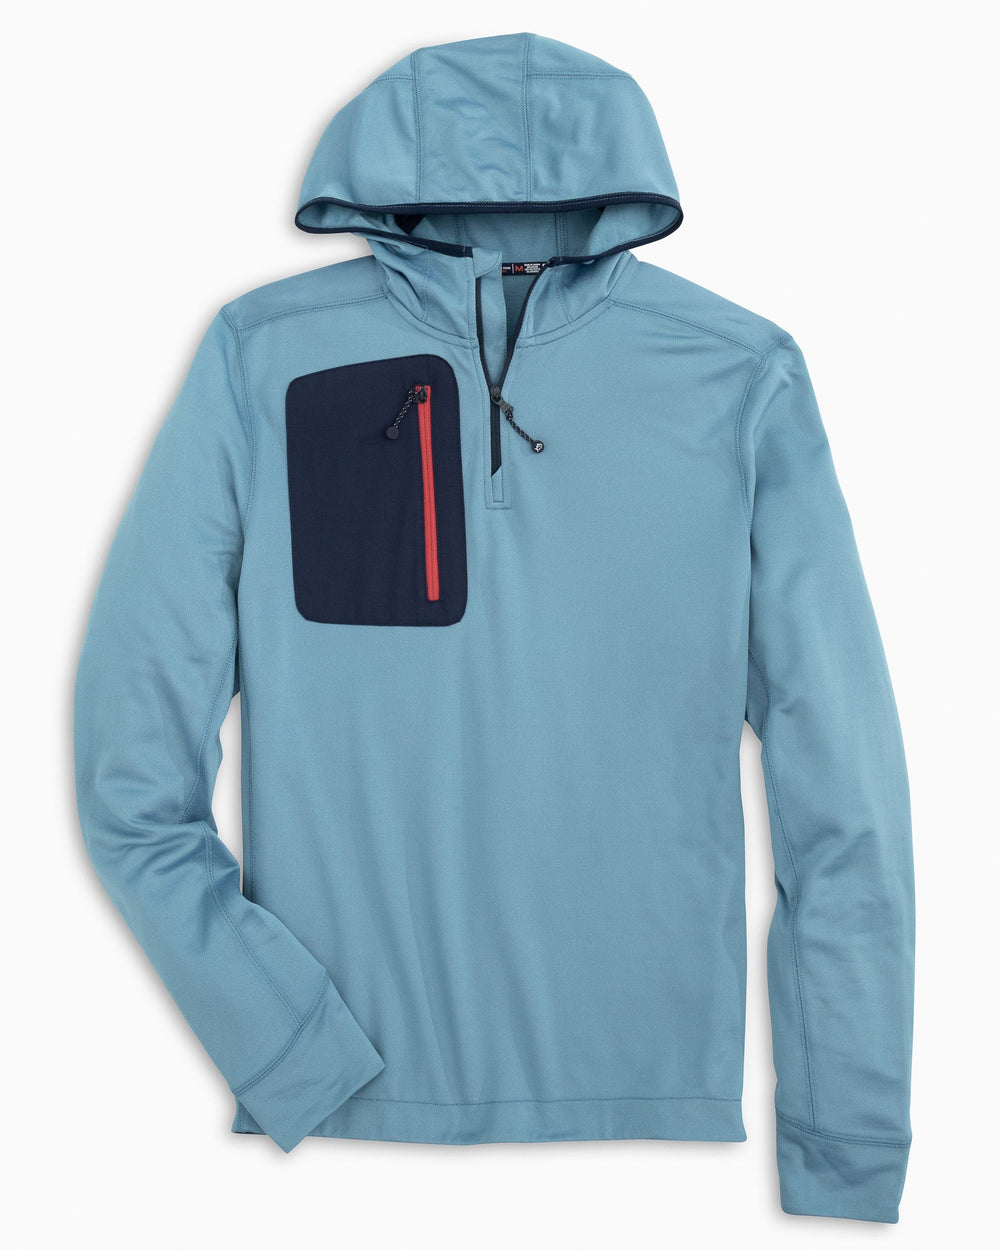 The front of the Men's Lockwood Fleece Performance Quarter Zip Hoodie by Southern Tide - French Lilac